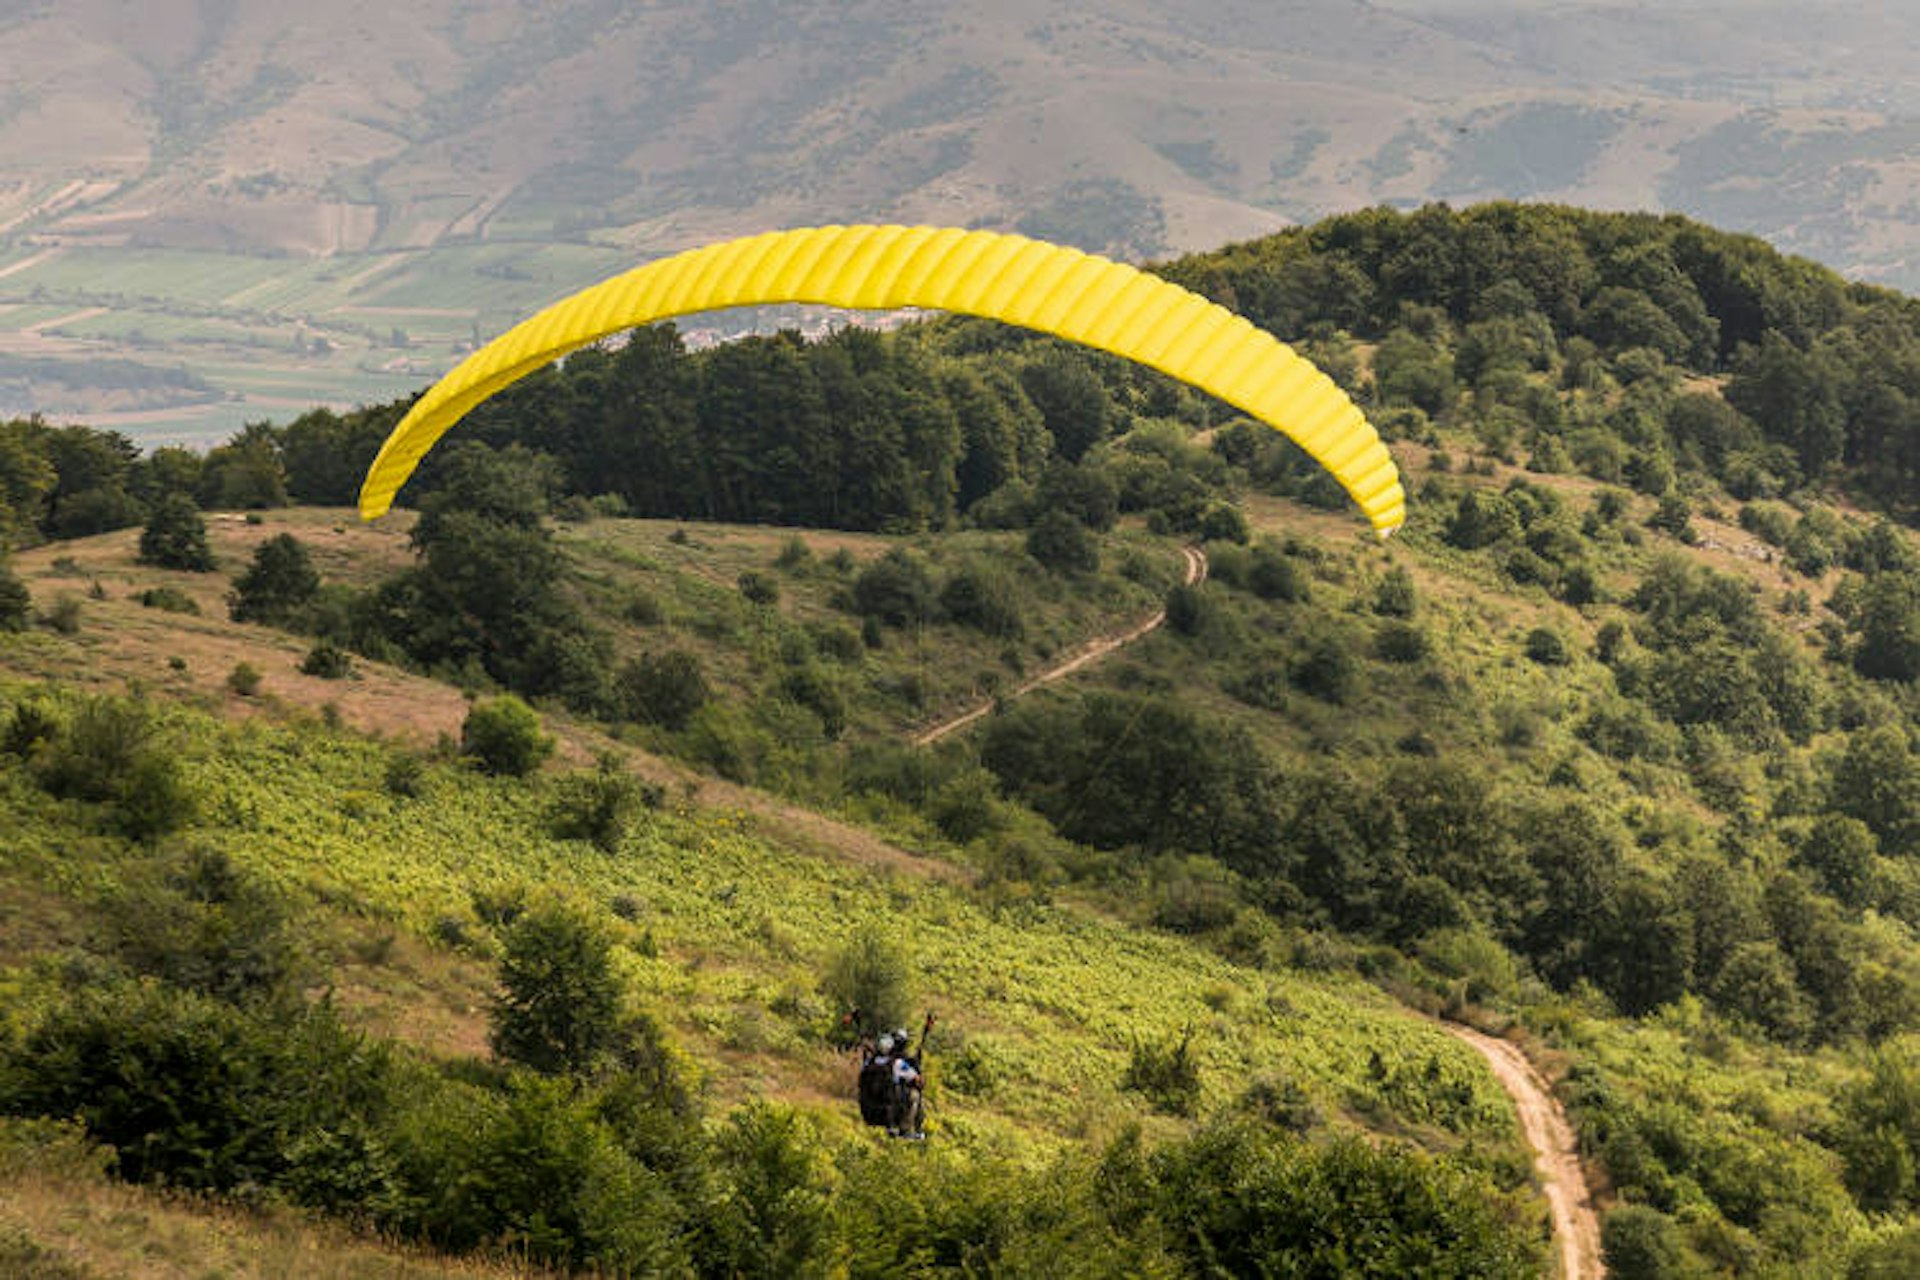 Paragliding in Kruševo area. Image courtesy of Macedonian Agency for the Promotion and Support of Tourism.